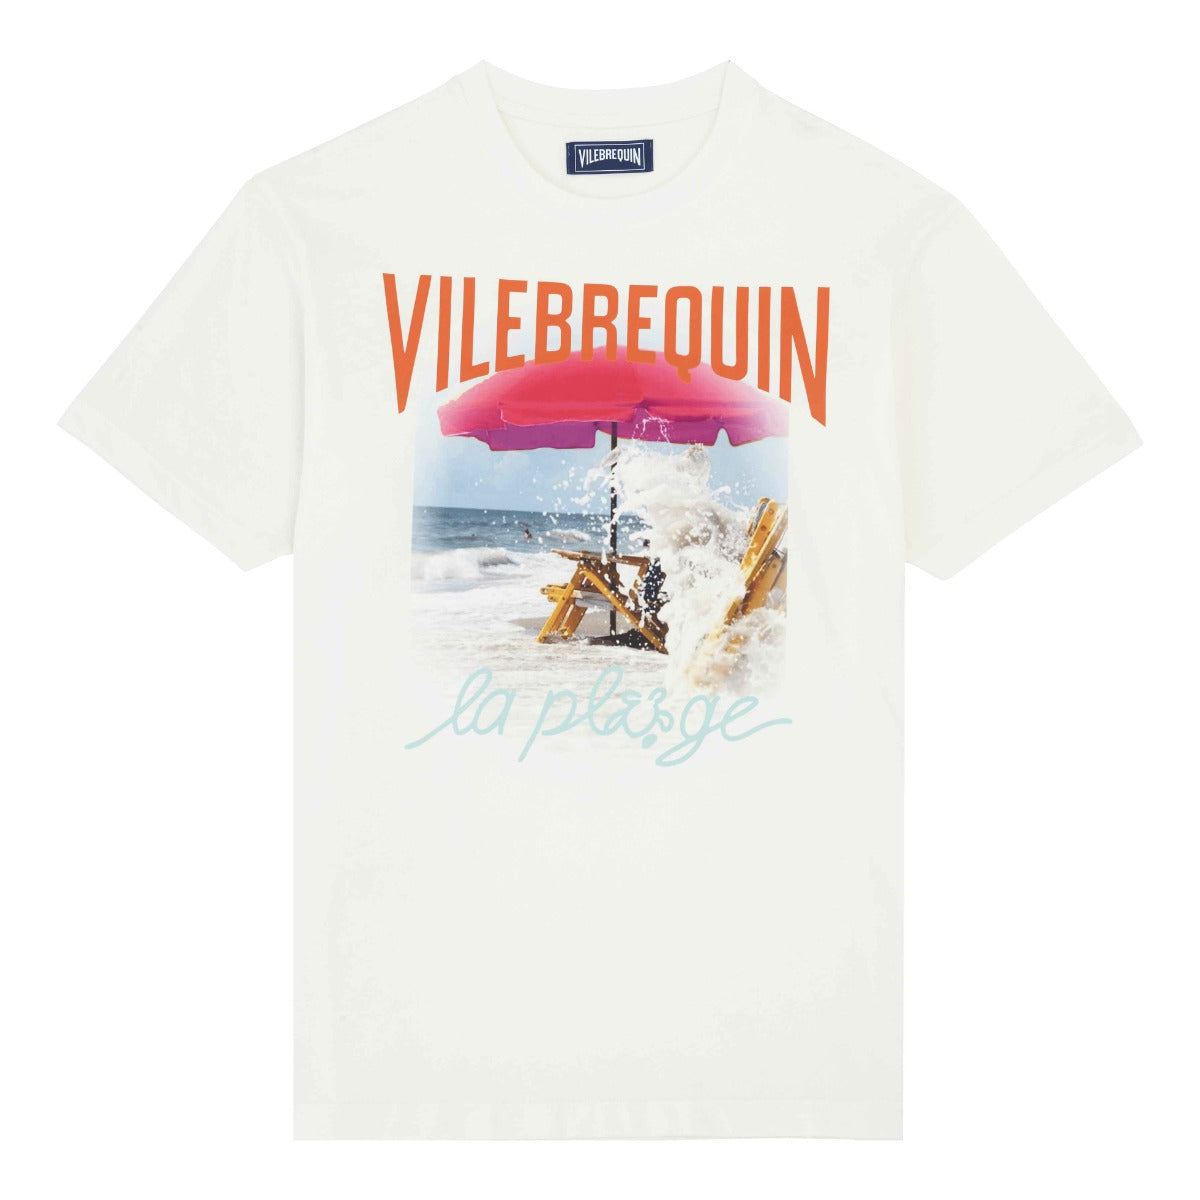 Off-White ‘Wave on the Beach’ T-shirt Short Sleeve Vilebrequin   